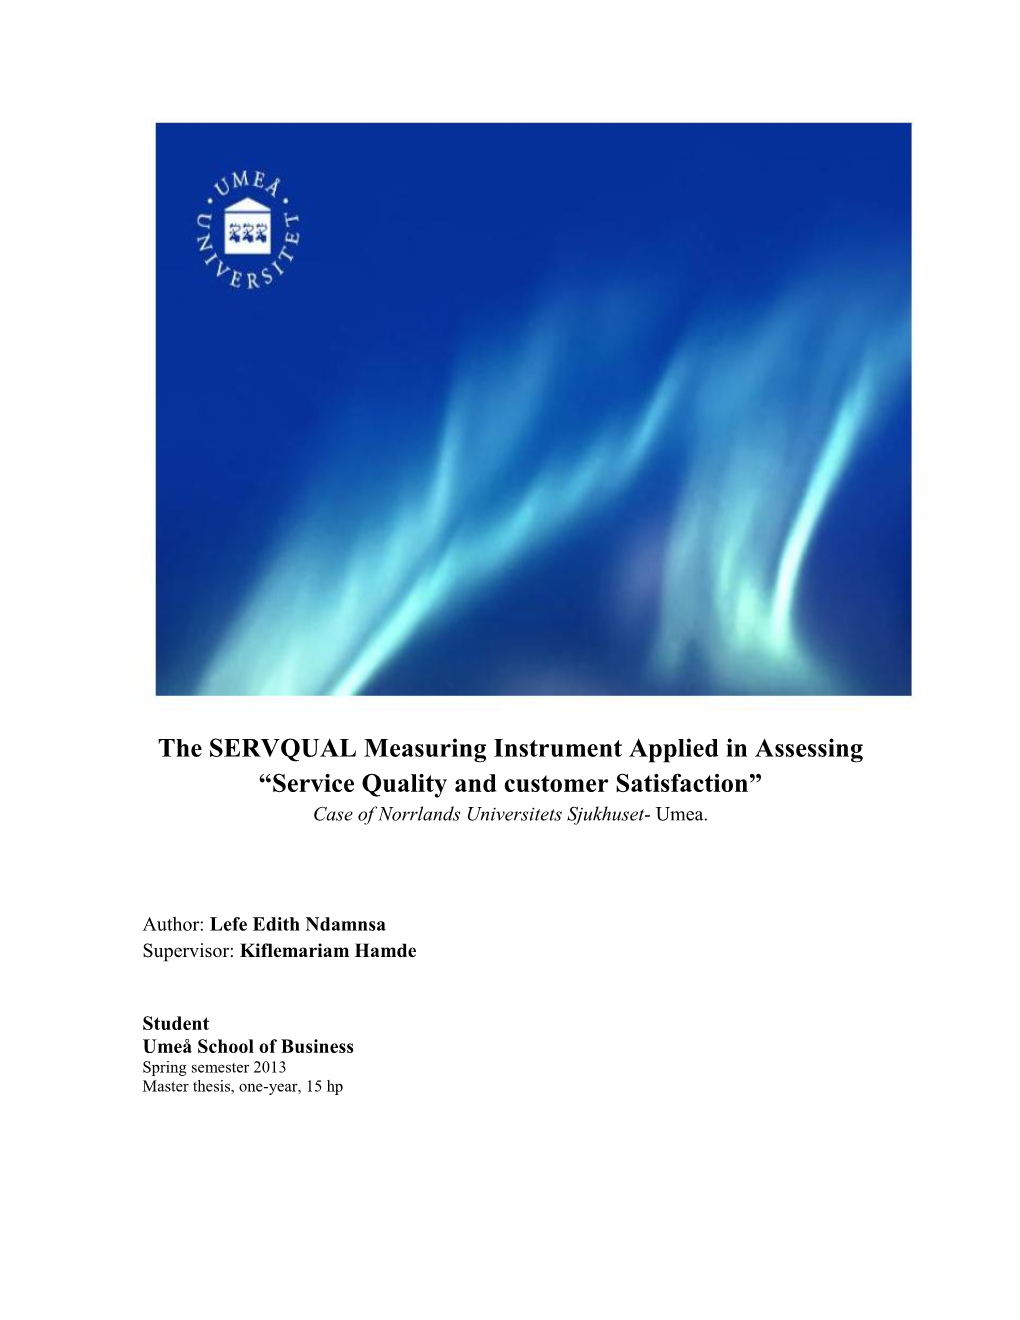 The SERVQUAL Measuring Instrument Applied in Assessing “Service Quality and Customer Satisfaction” Case of Norrlands Universitets Sjukhuset- Umea